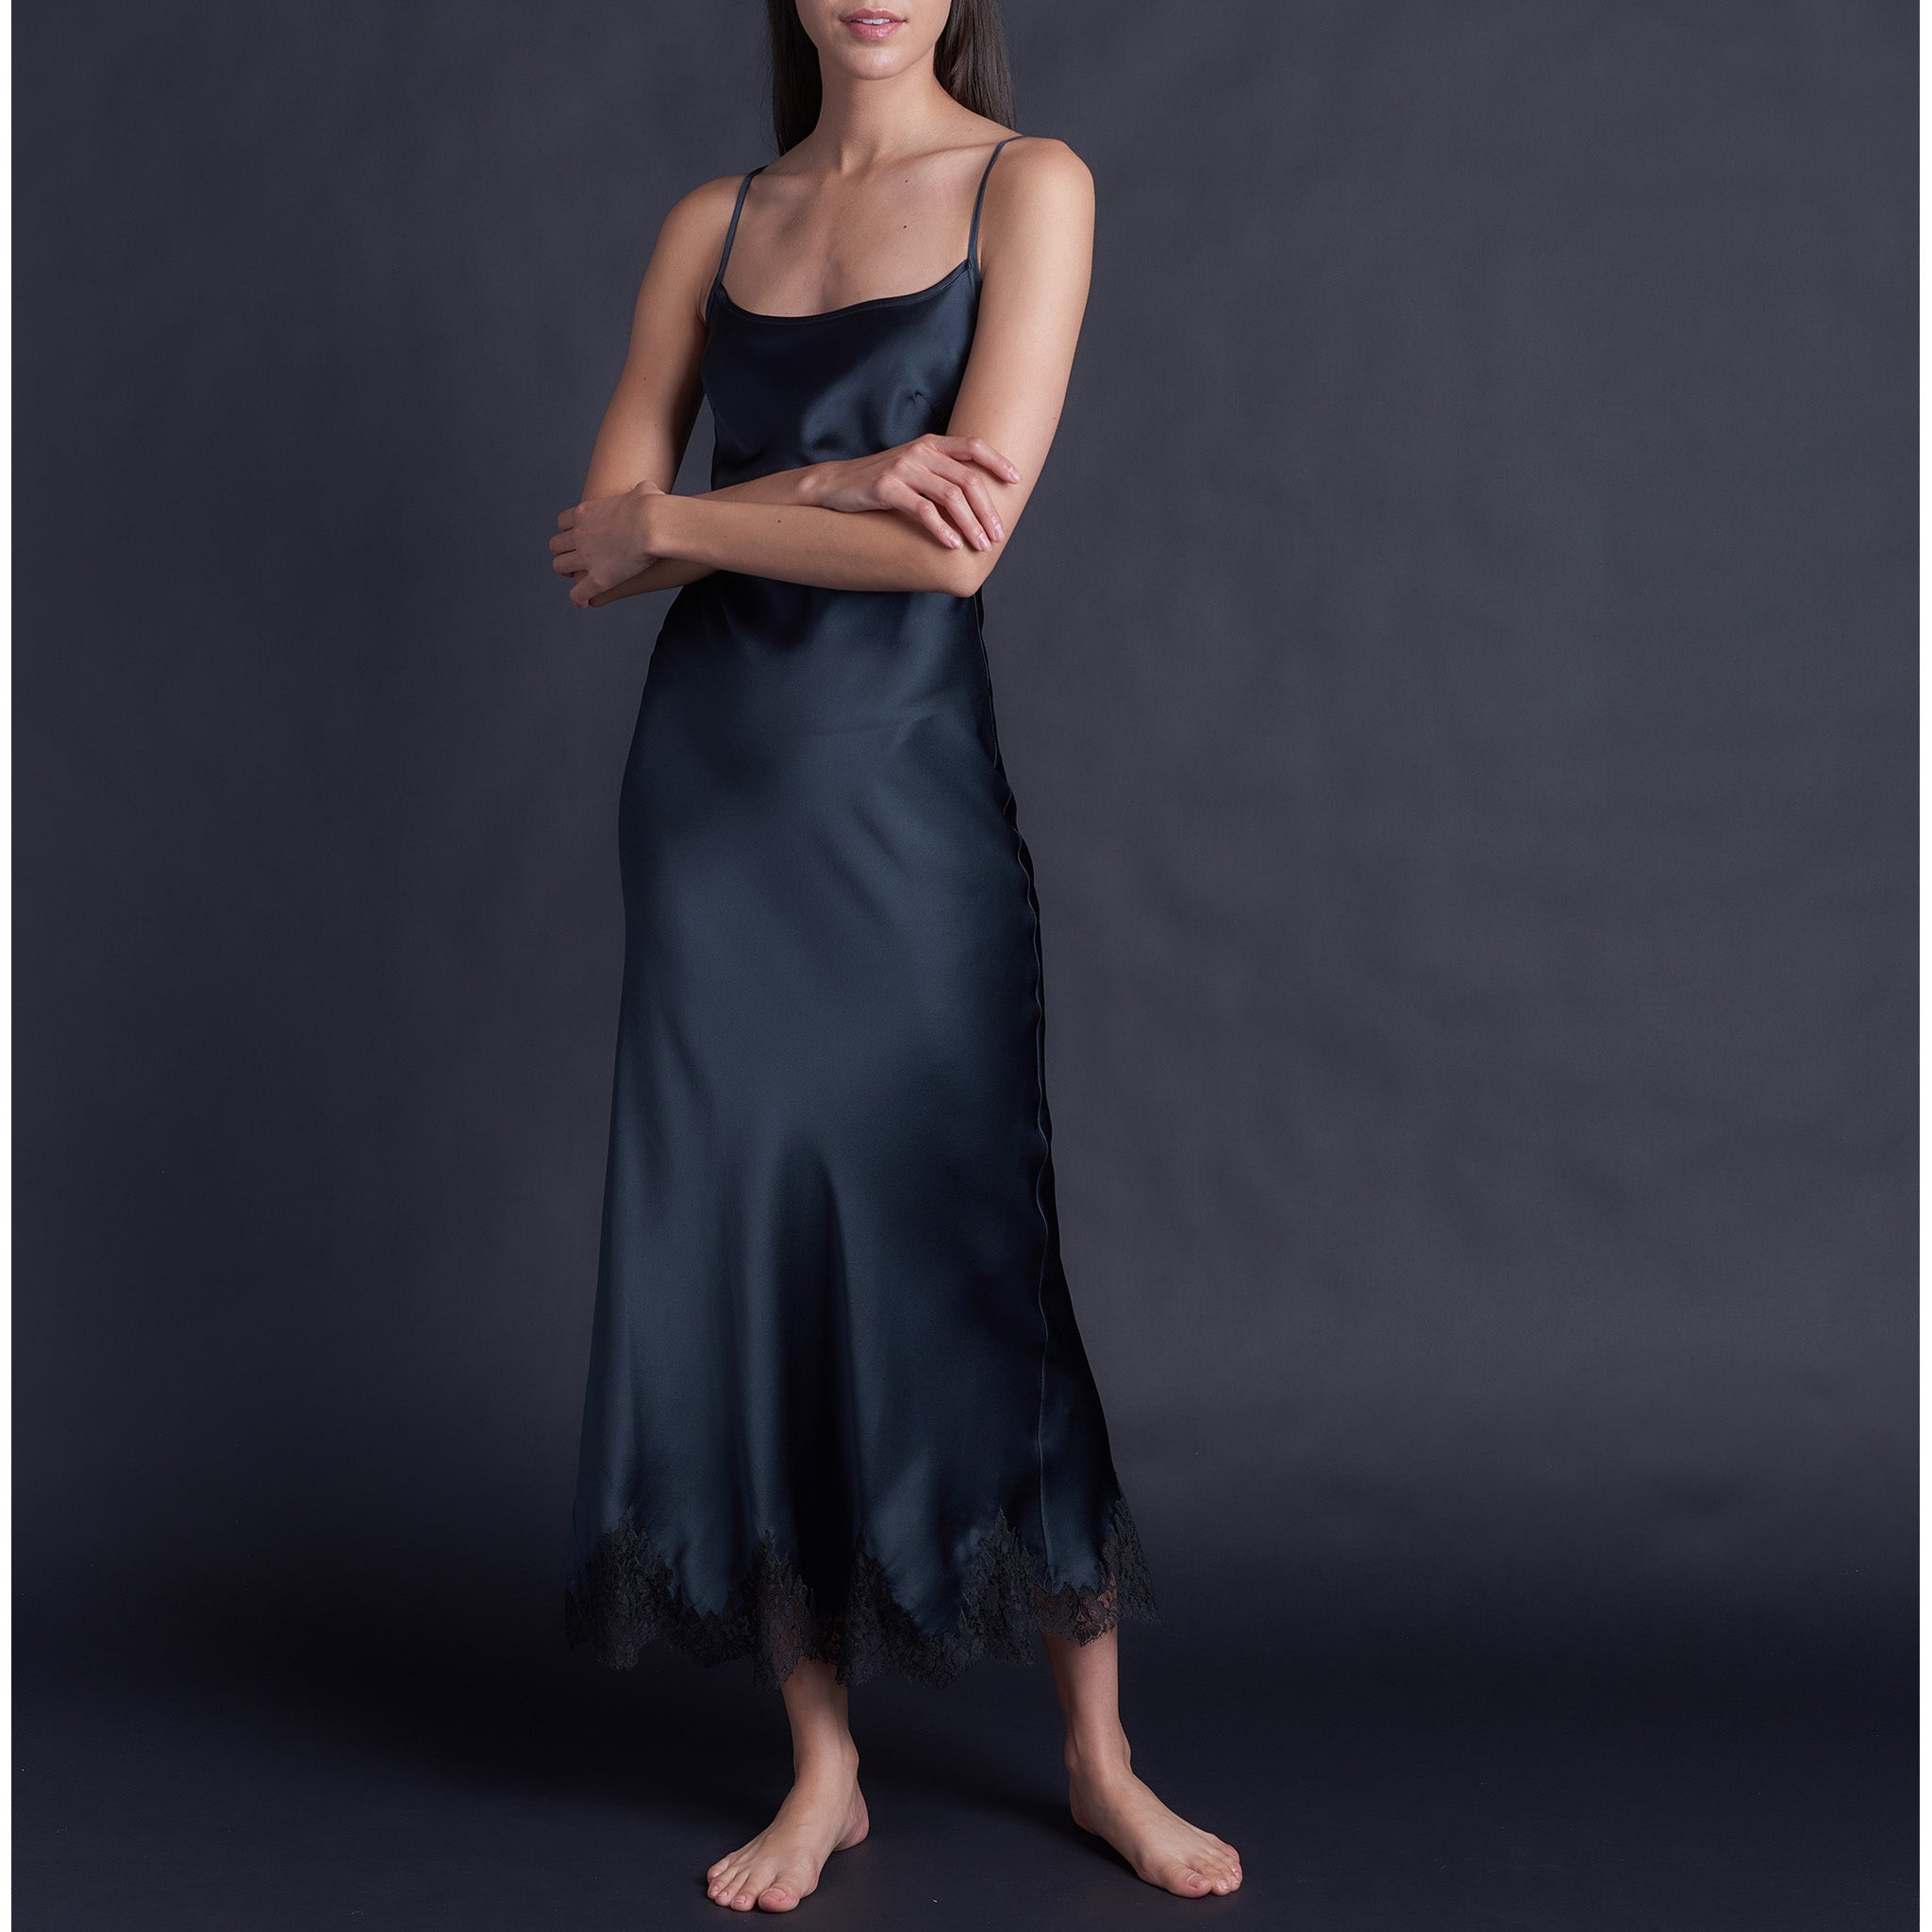 Juno Slip Dress in Sapphire Silk Charmeuse with Lace